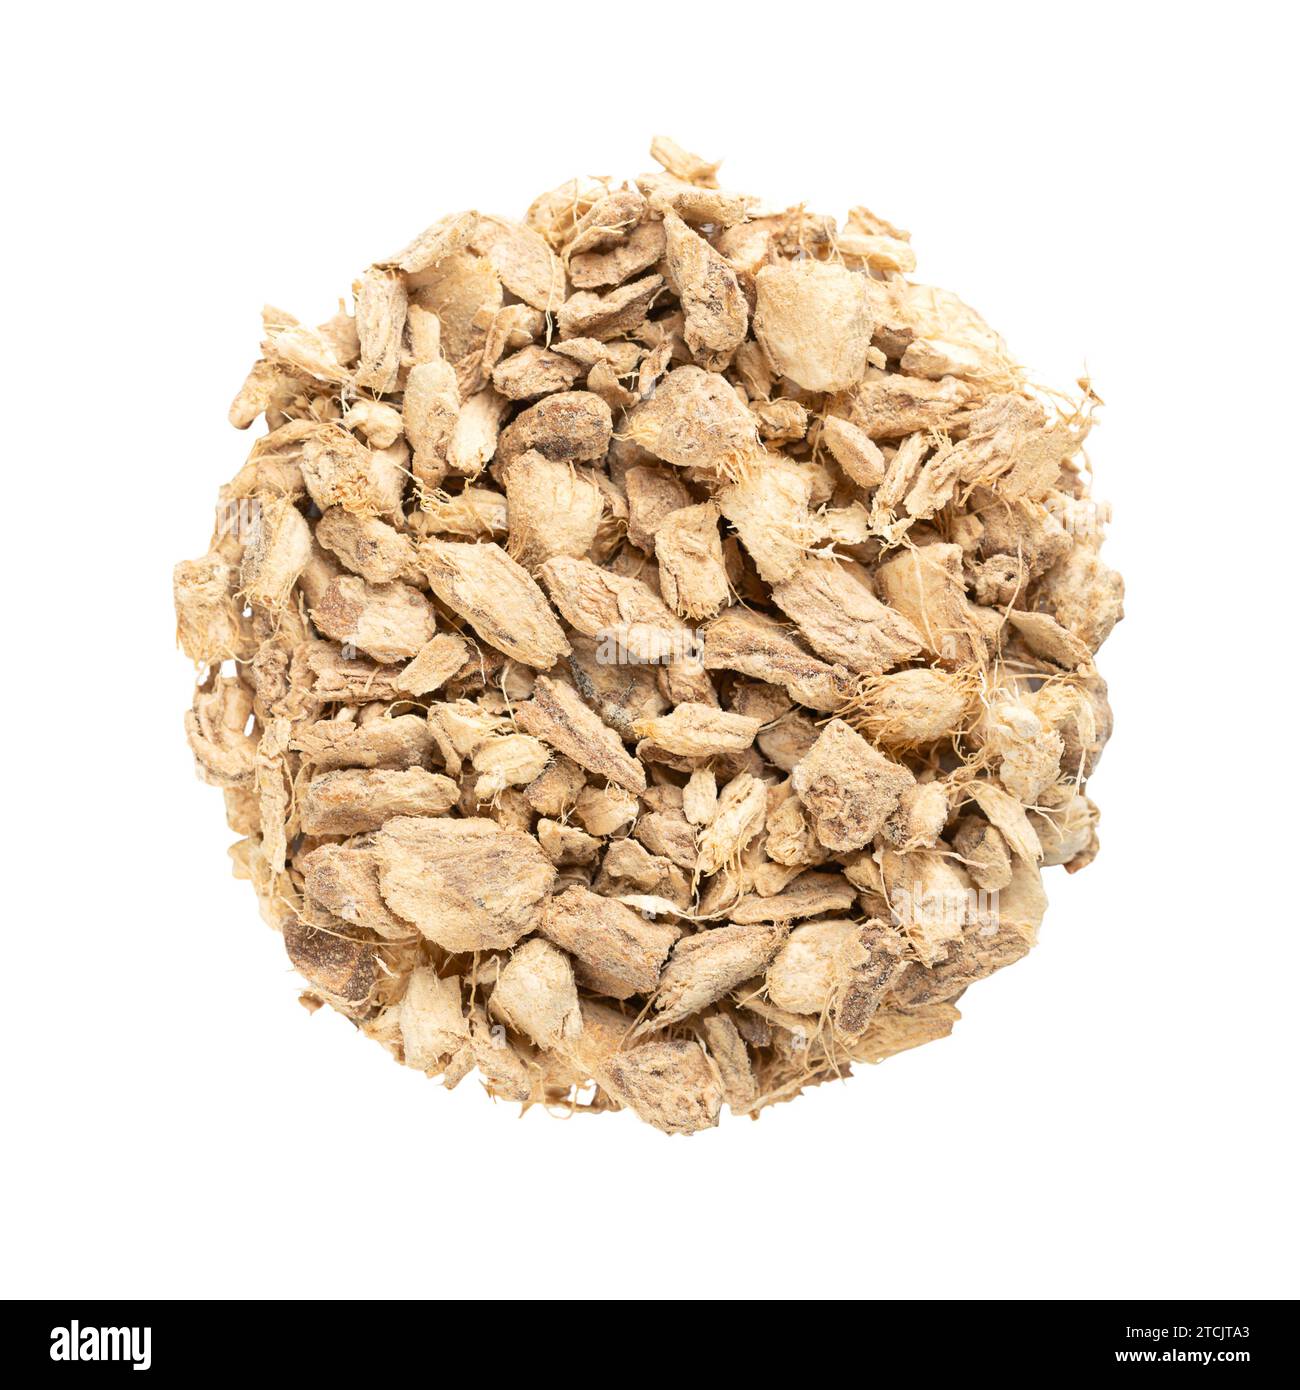 Ginger roots, cut and dried, arranged in a circle. Pieces of dry ginger rhizomes, used as warming spice tea and in traditional folk medicine. Stock Photo